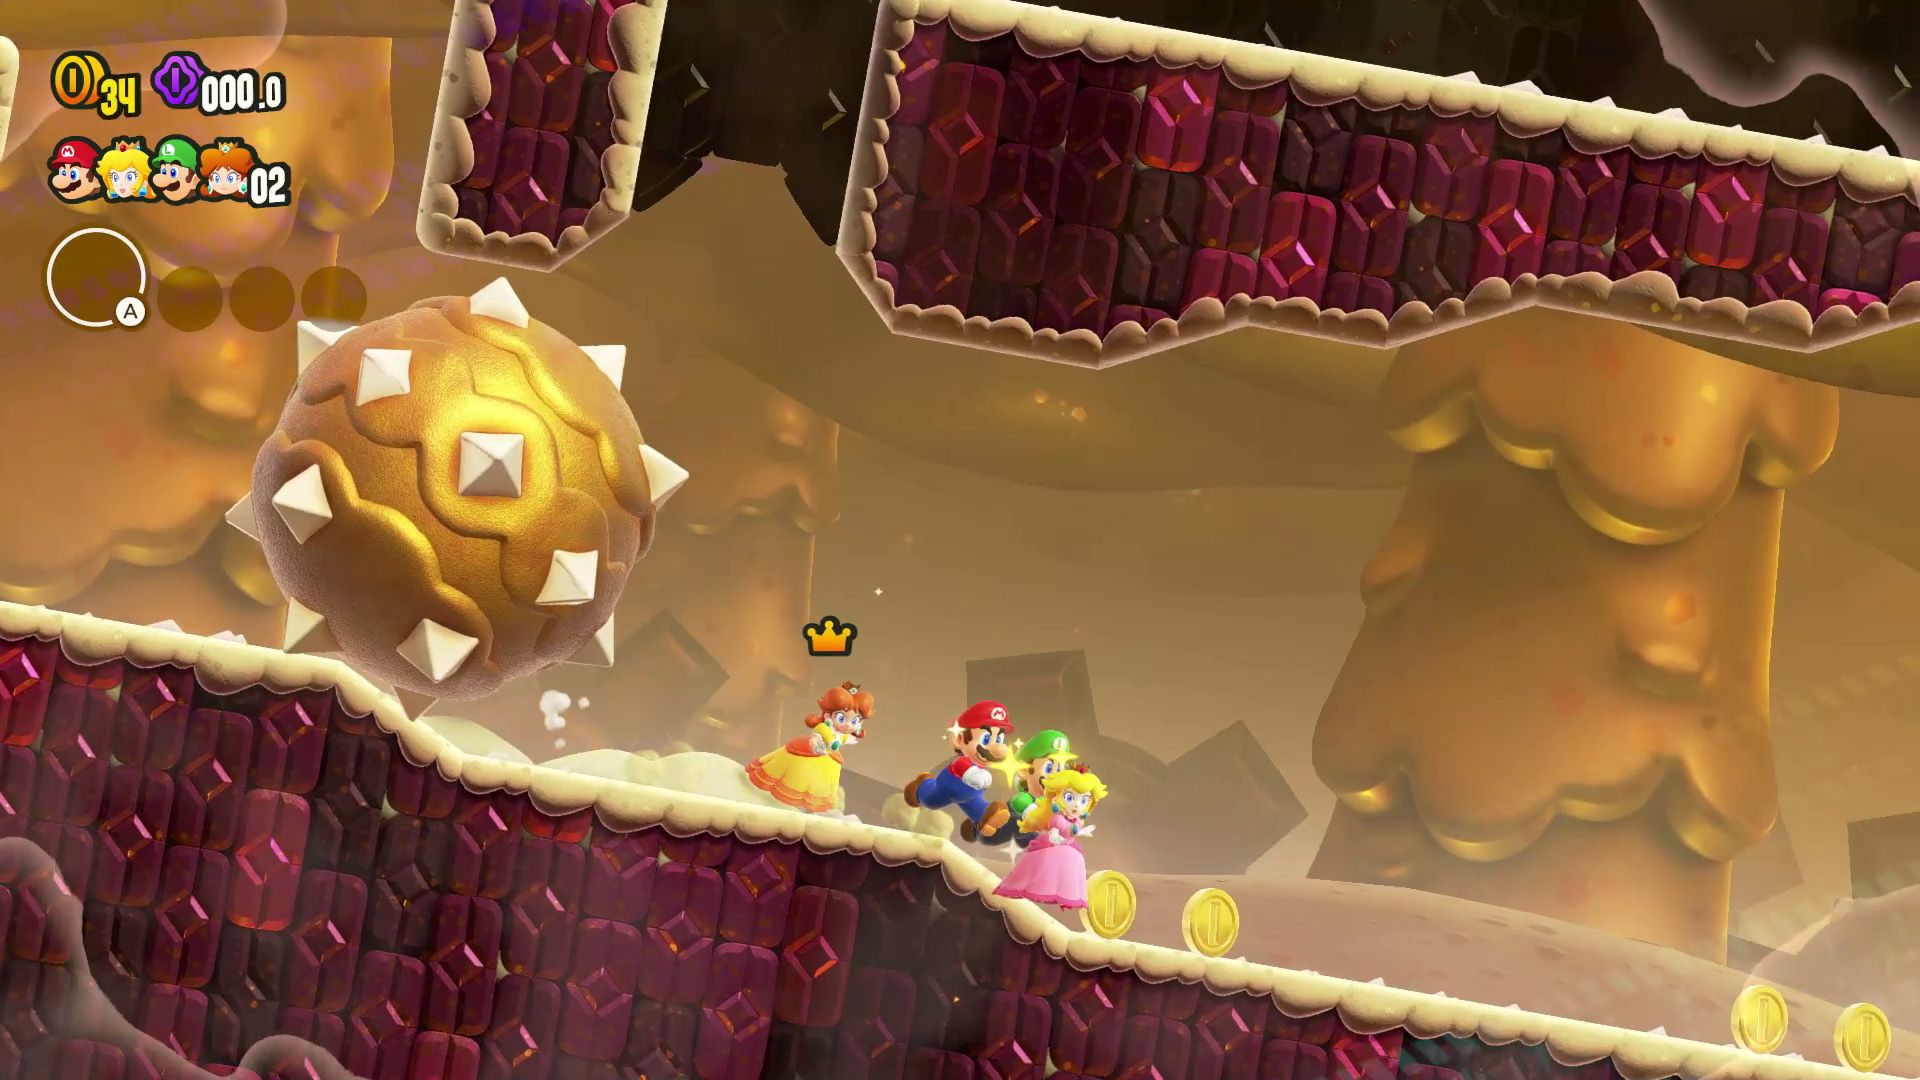 Mario and friends running from a spikey ball in a sandy level in Super Mario Bros Wonder